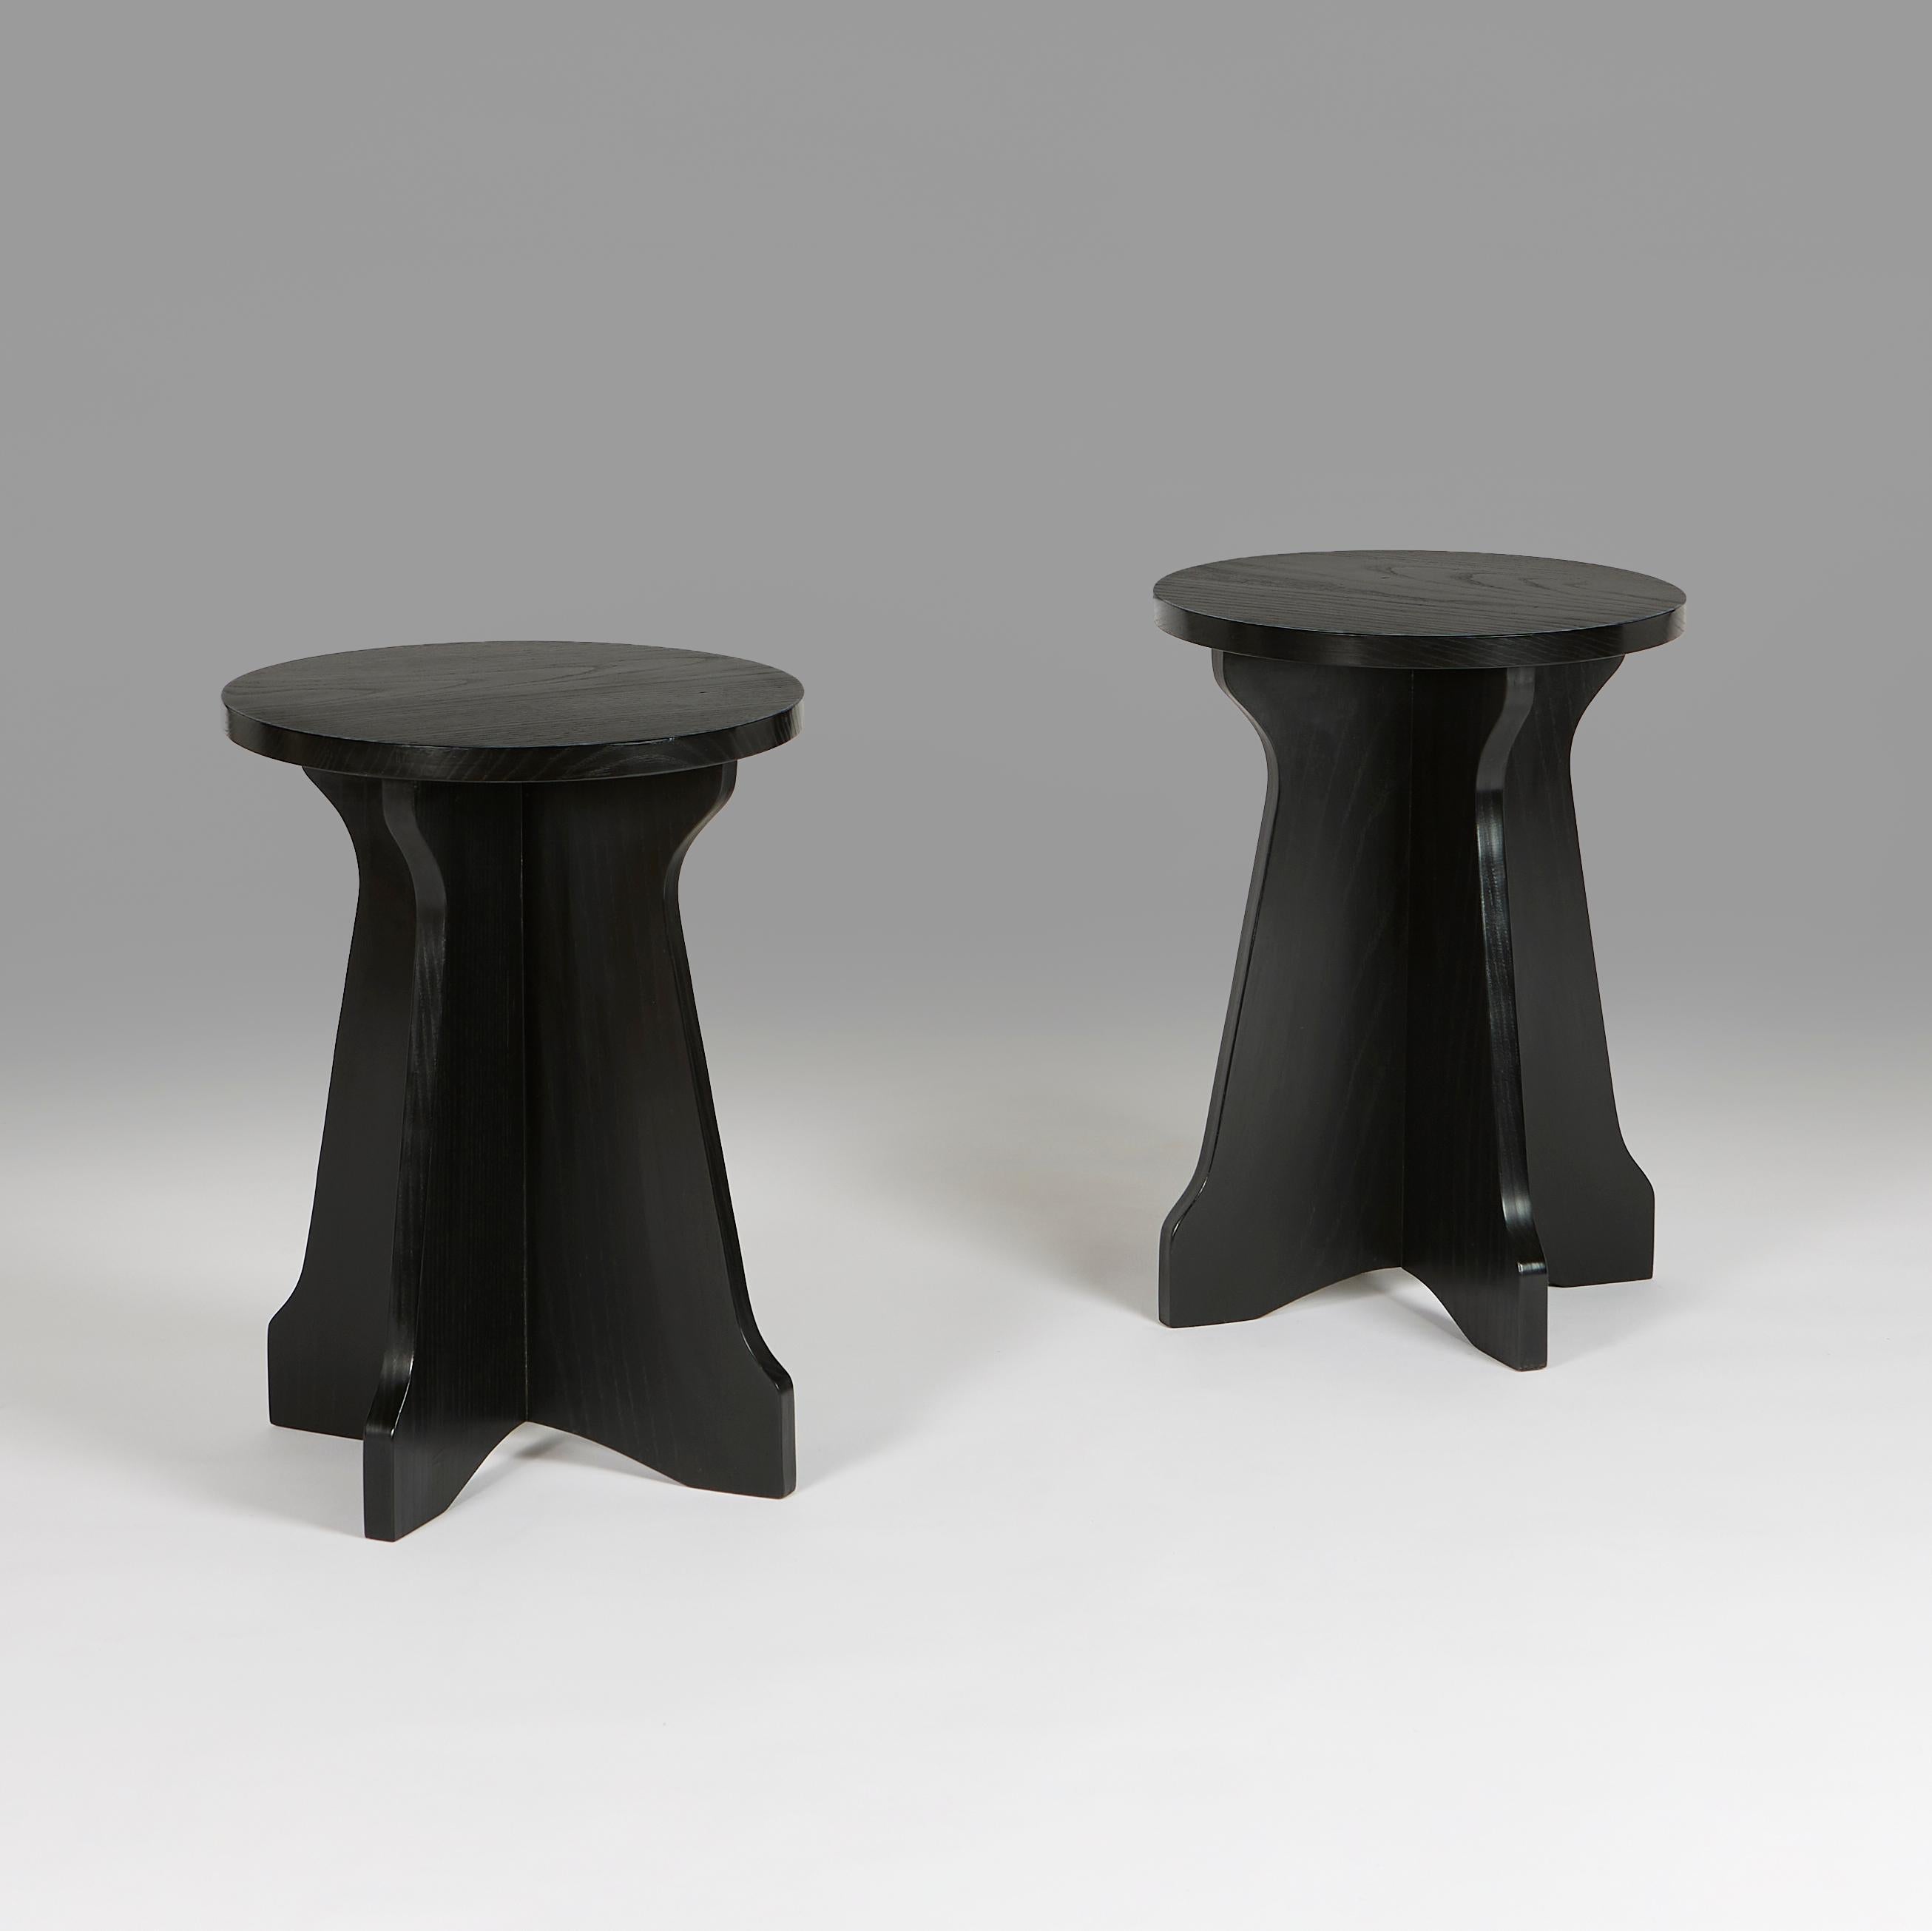 +VAT

England, made to order.

A pair of ebonised ash modernist occasional tables, with circular tops and cross frame bases. Made in the UK from sustainable ash, with black lacquer stain finish. 

Lead time 6-8 weeks.

Height 45.00cm
Diameter 33.50cm